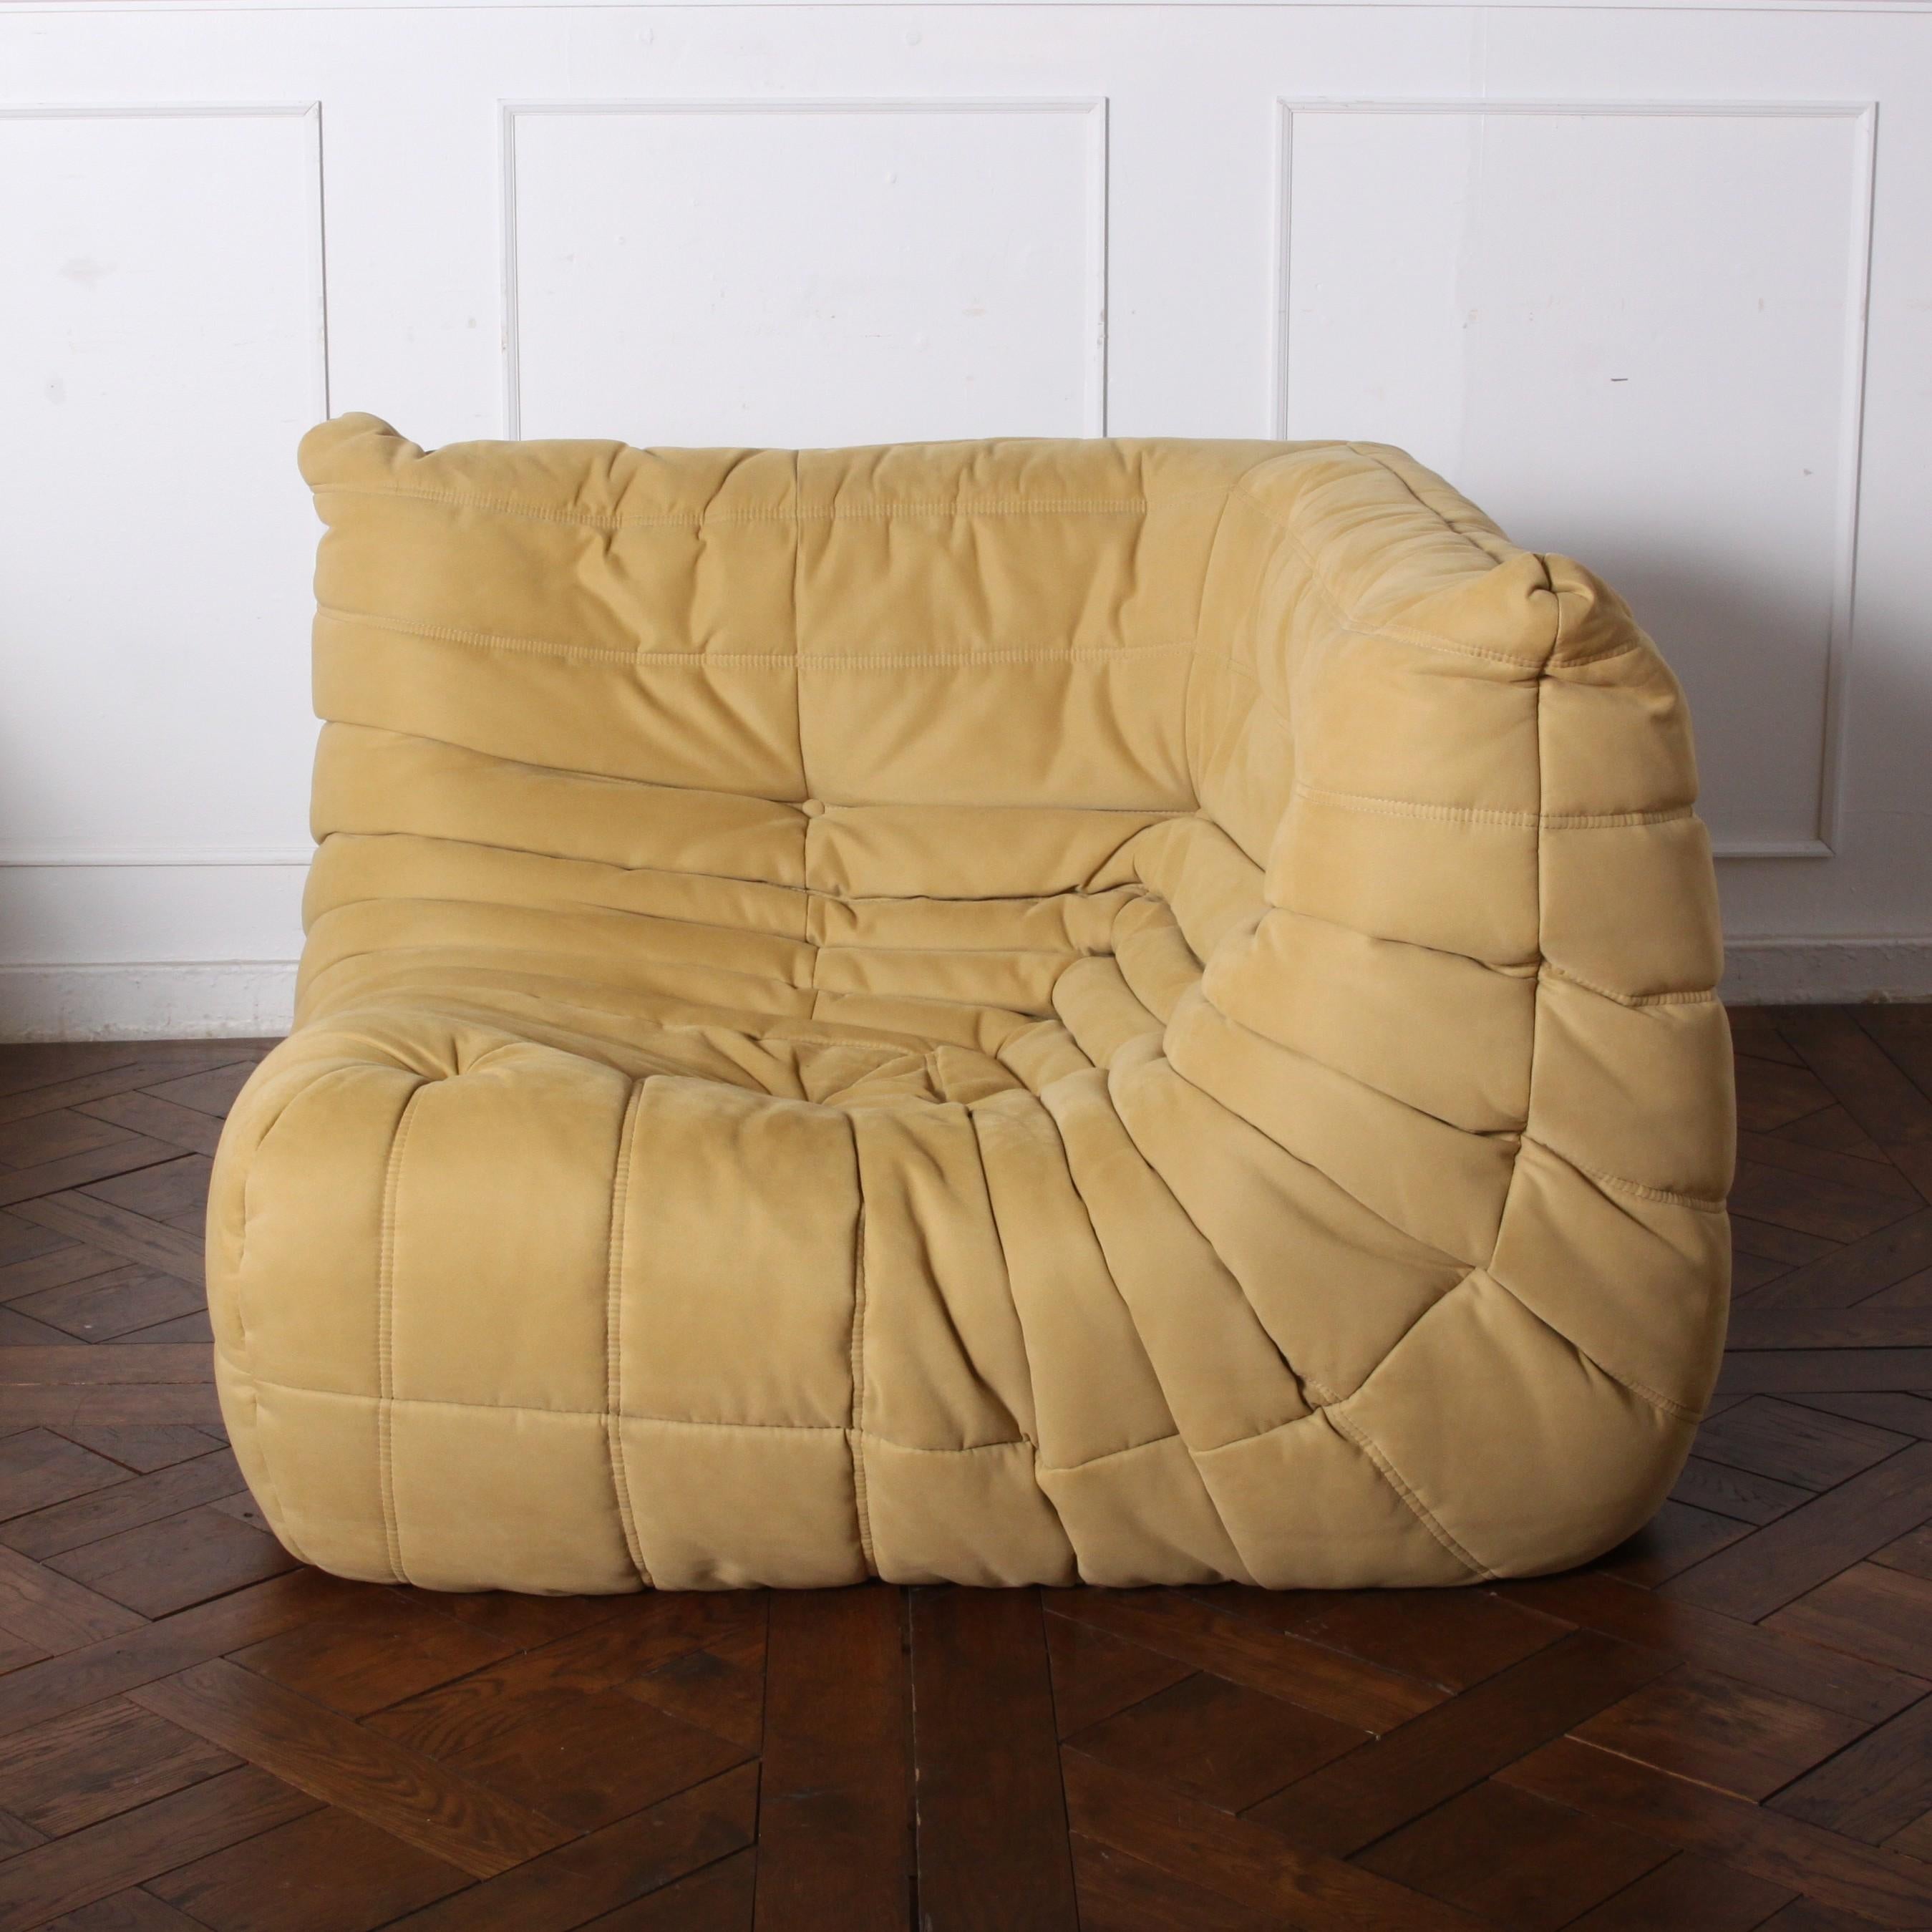 Quilted 'Togo' Sofa Suite by Michel Ducaroy for Ligne Roset